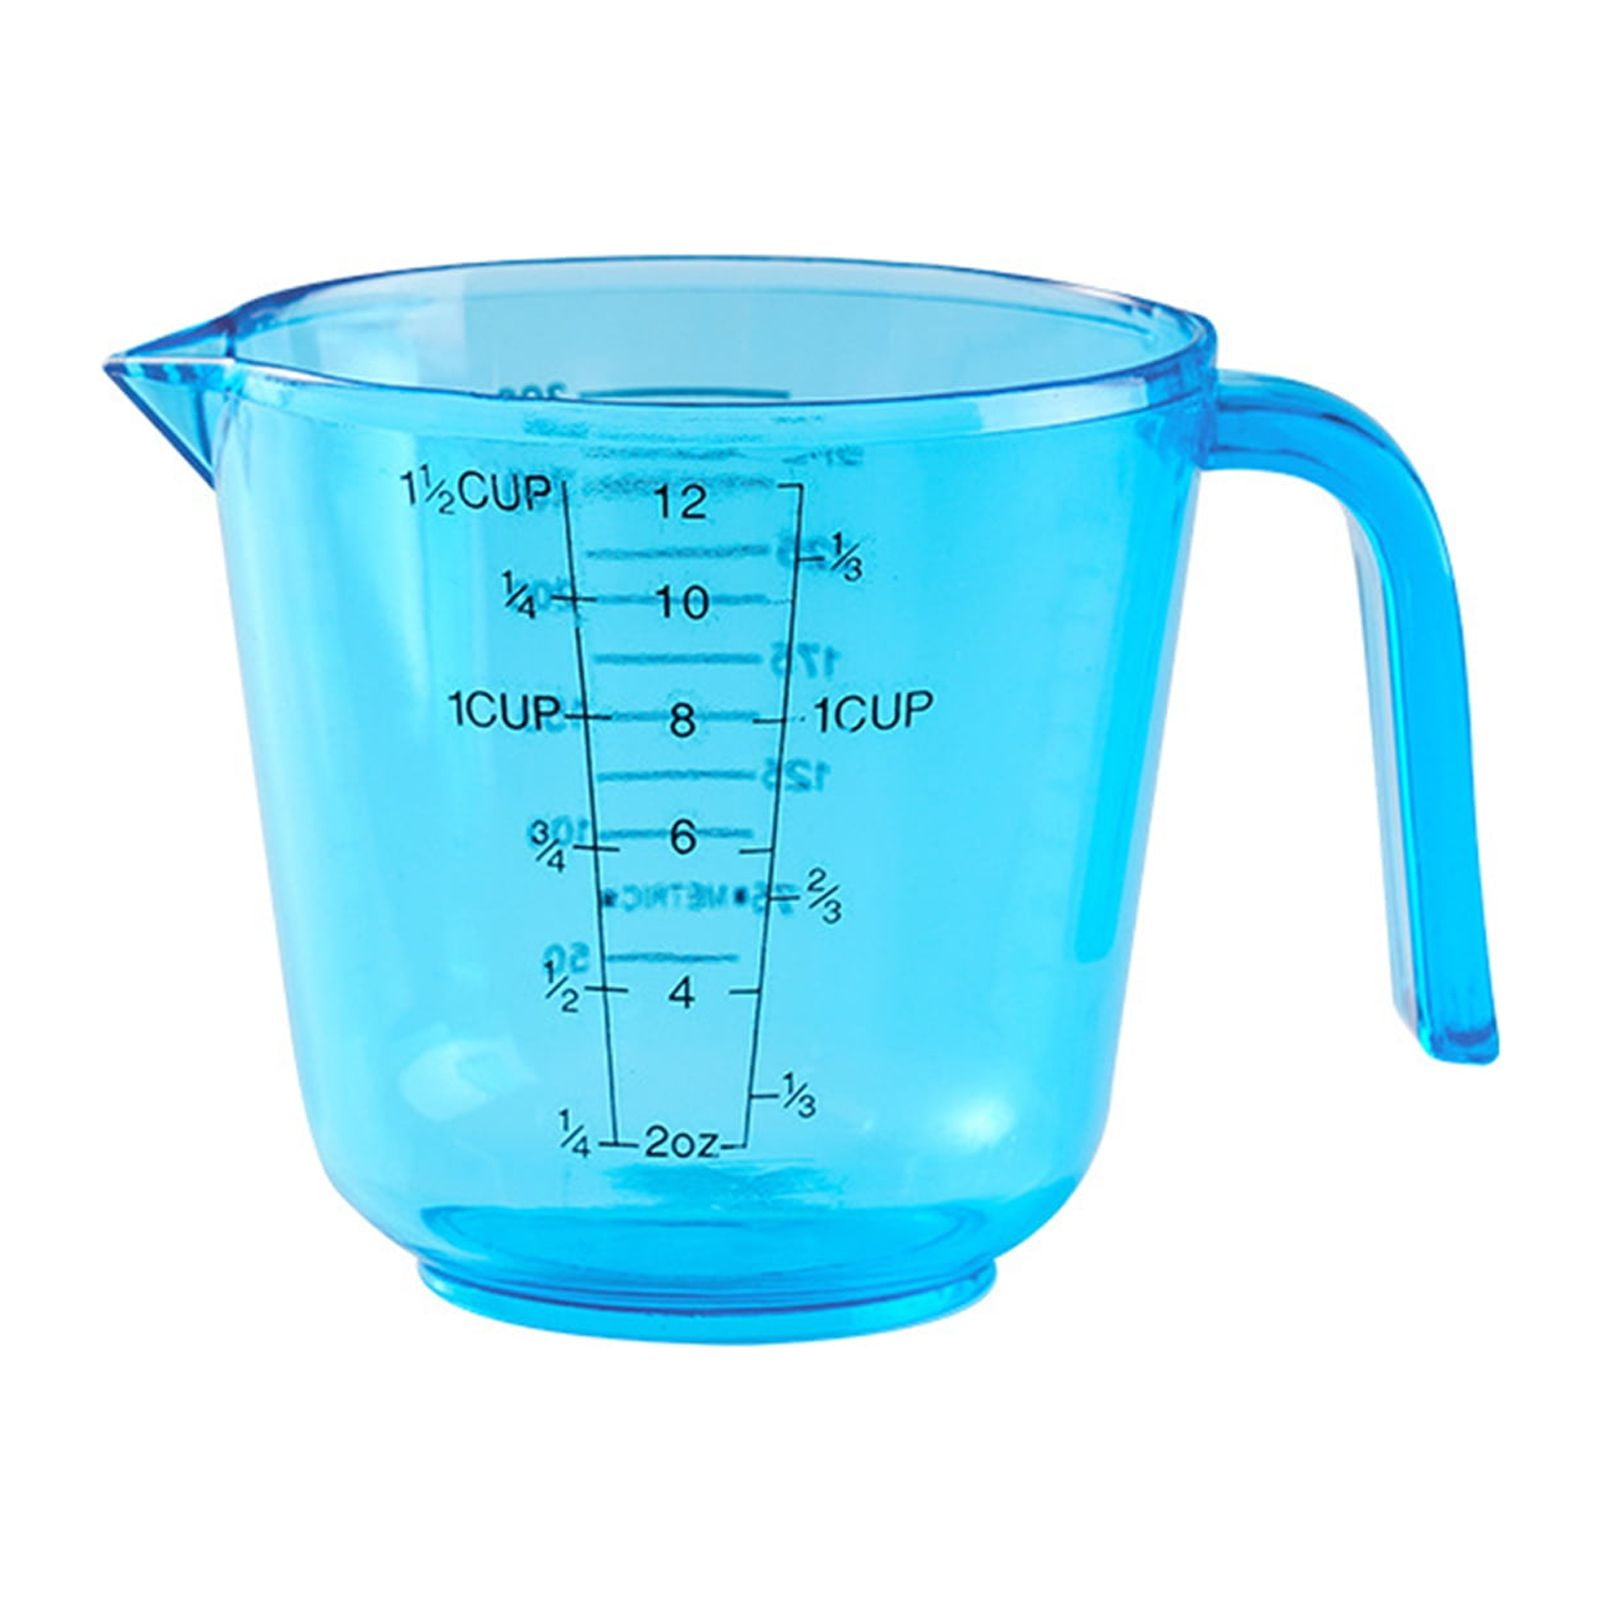 Marinex Pale Blue Glass 1 Cup Measuring Cup YD#011-1120-00270